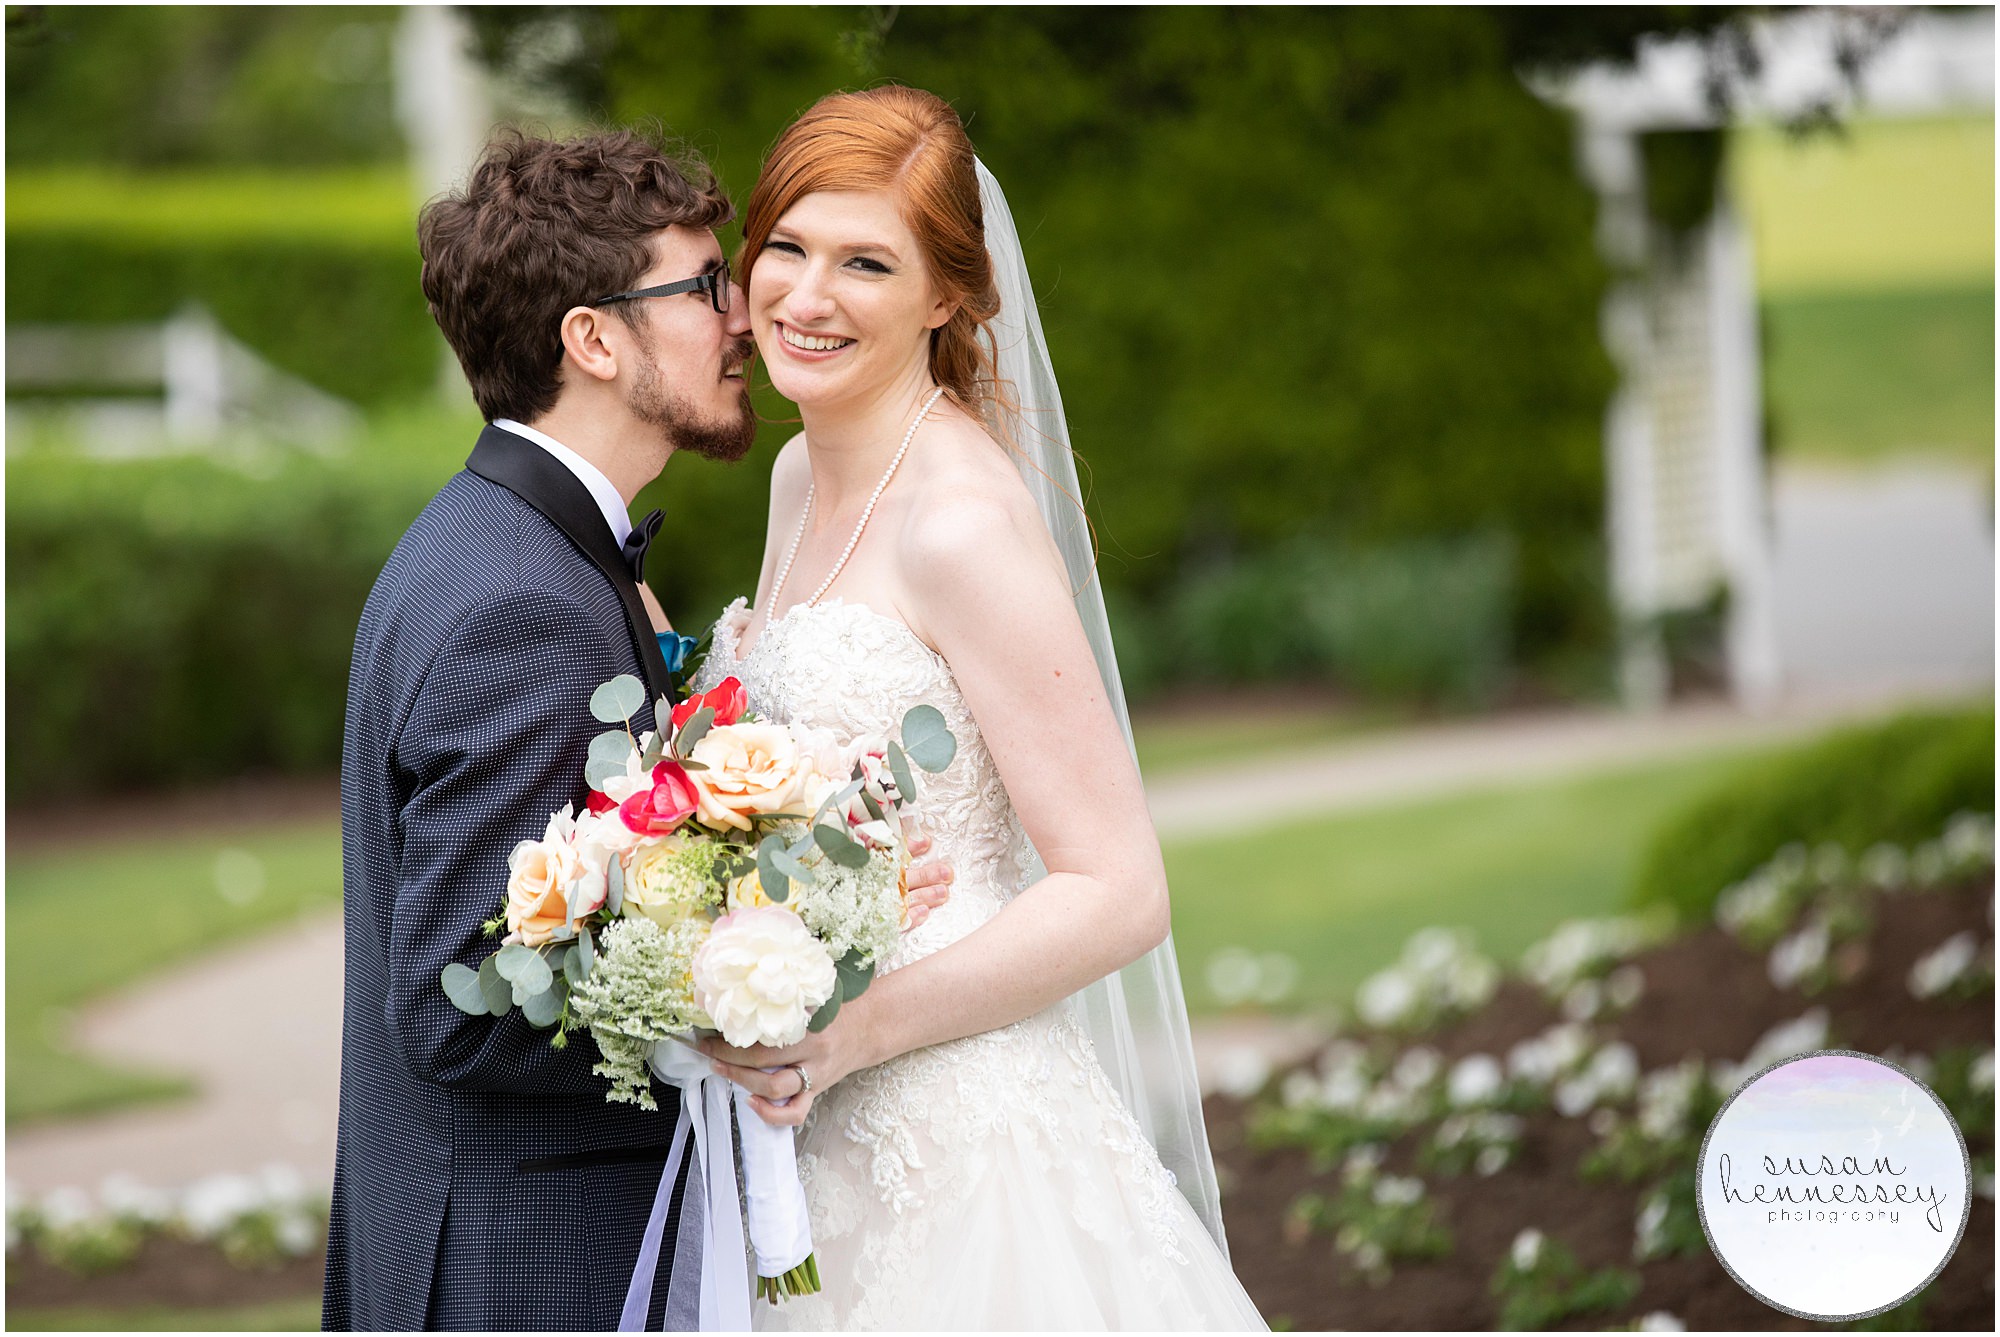 Couple portraits of bride and groom at Spring wedding